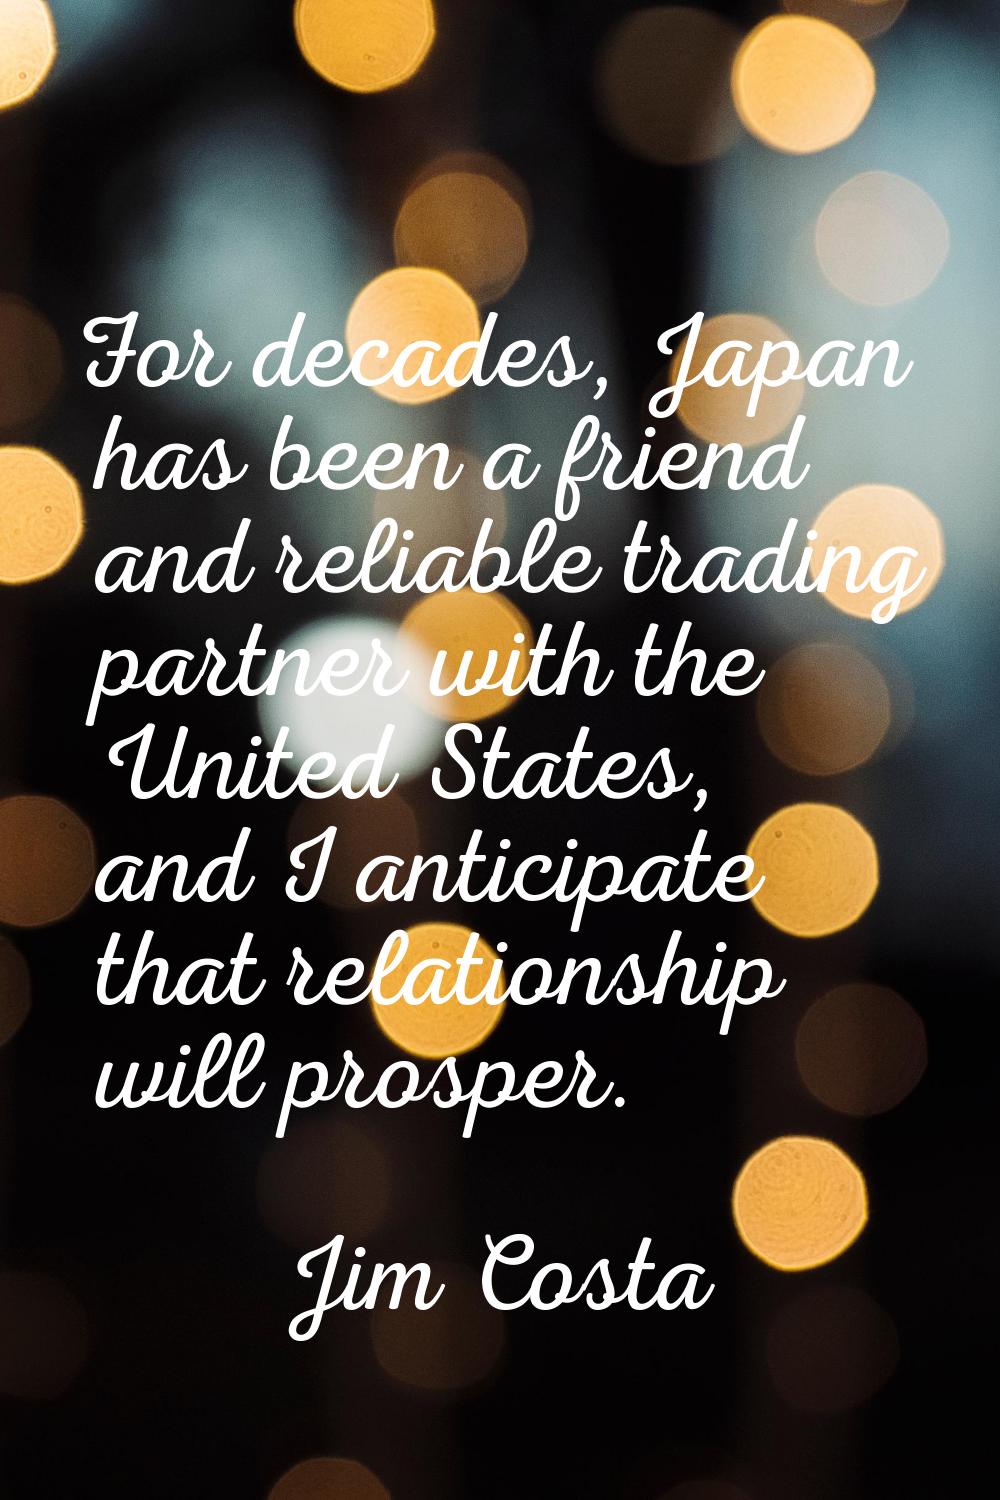 For decades, Japan has been a friend and reliable trading partner with the United States, and I ant